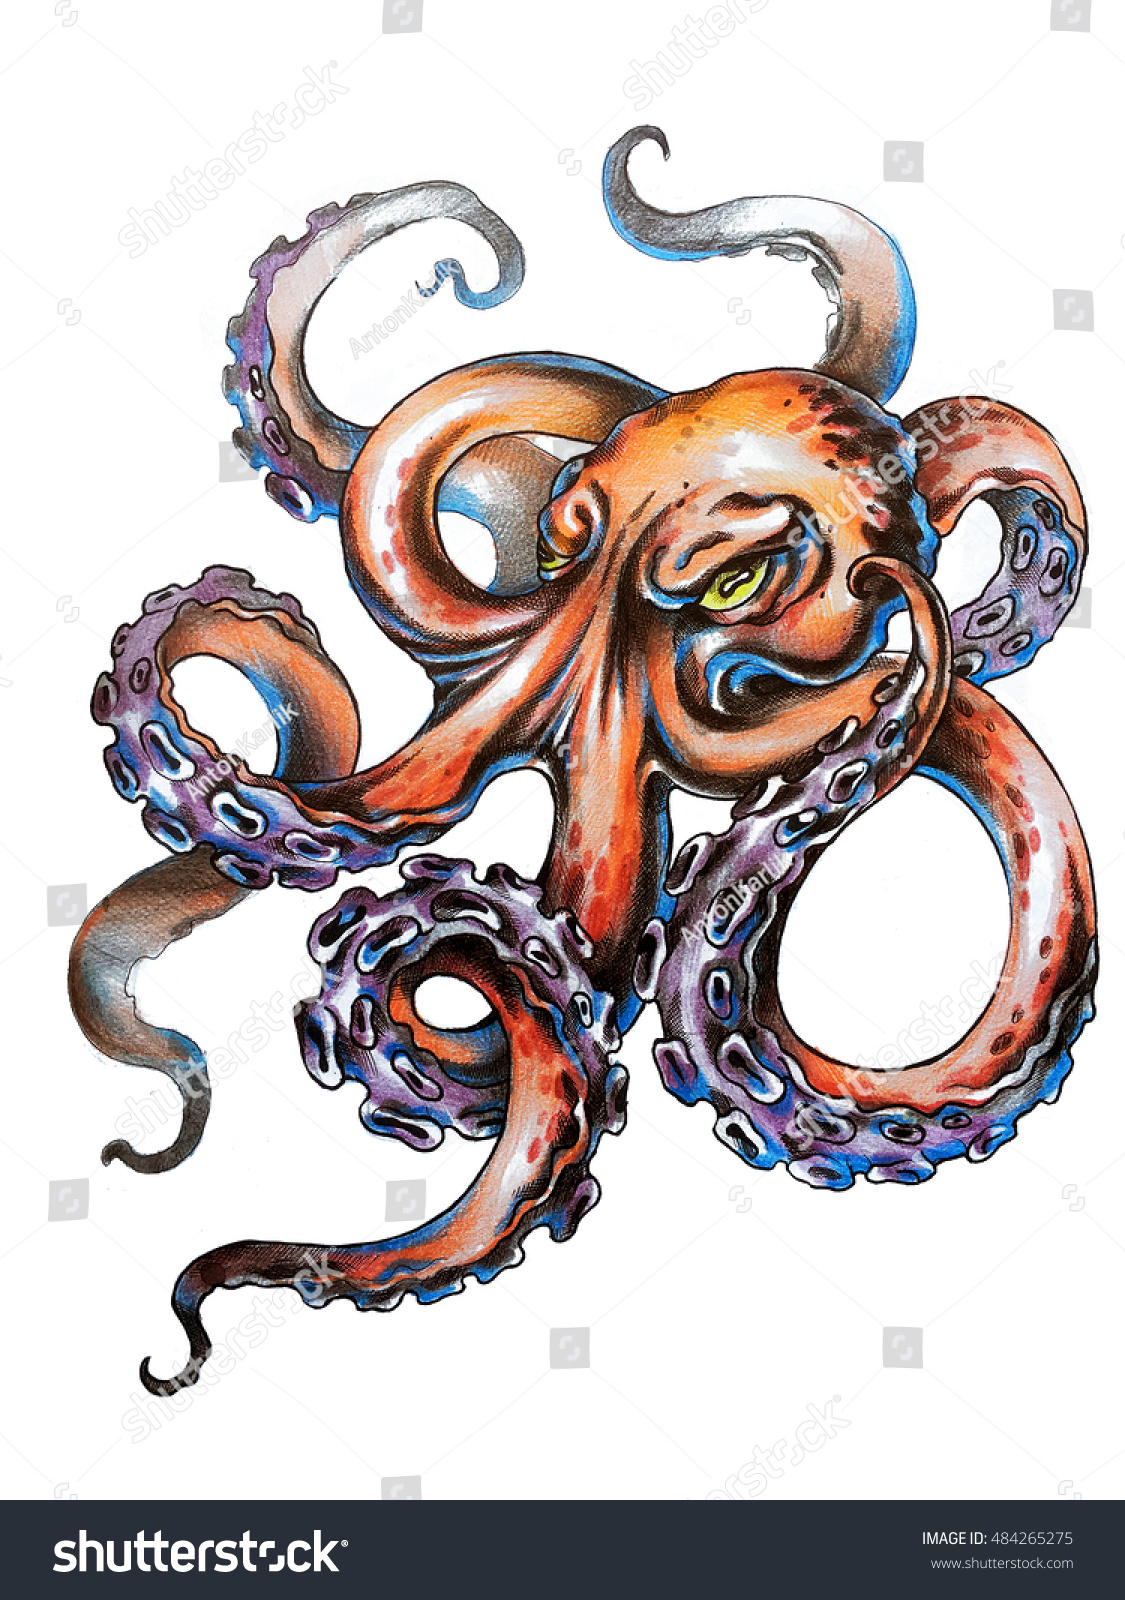 Angry Octopus Long Tentacles Realistic Illustration Stock Illustration 484265275 How to draw a cartoon octopus. https www shutterstock com image illustration angry octopus long tentacles realistic illustration 484265275